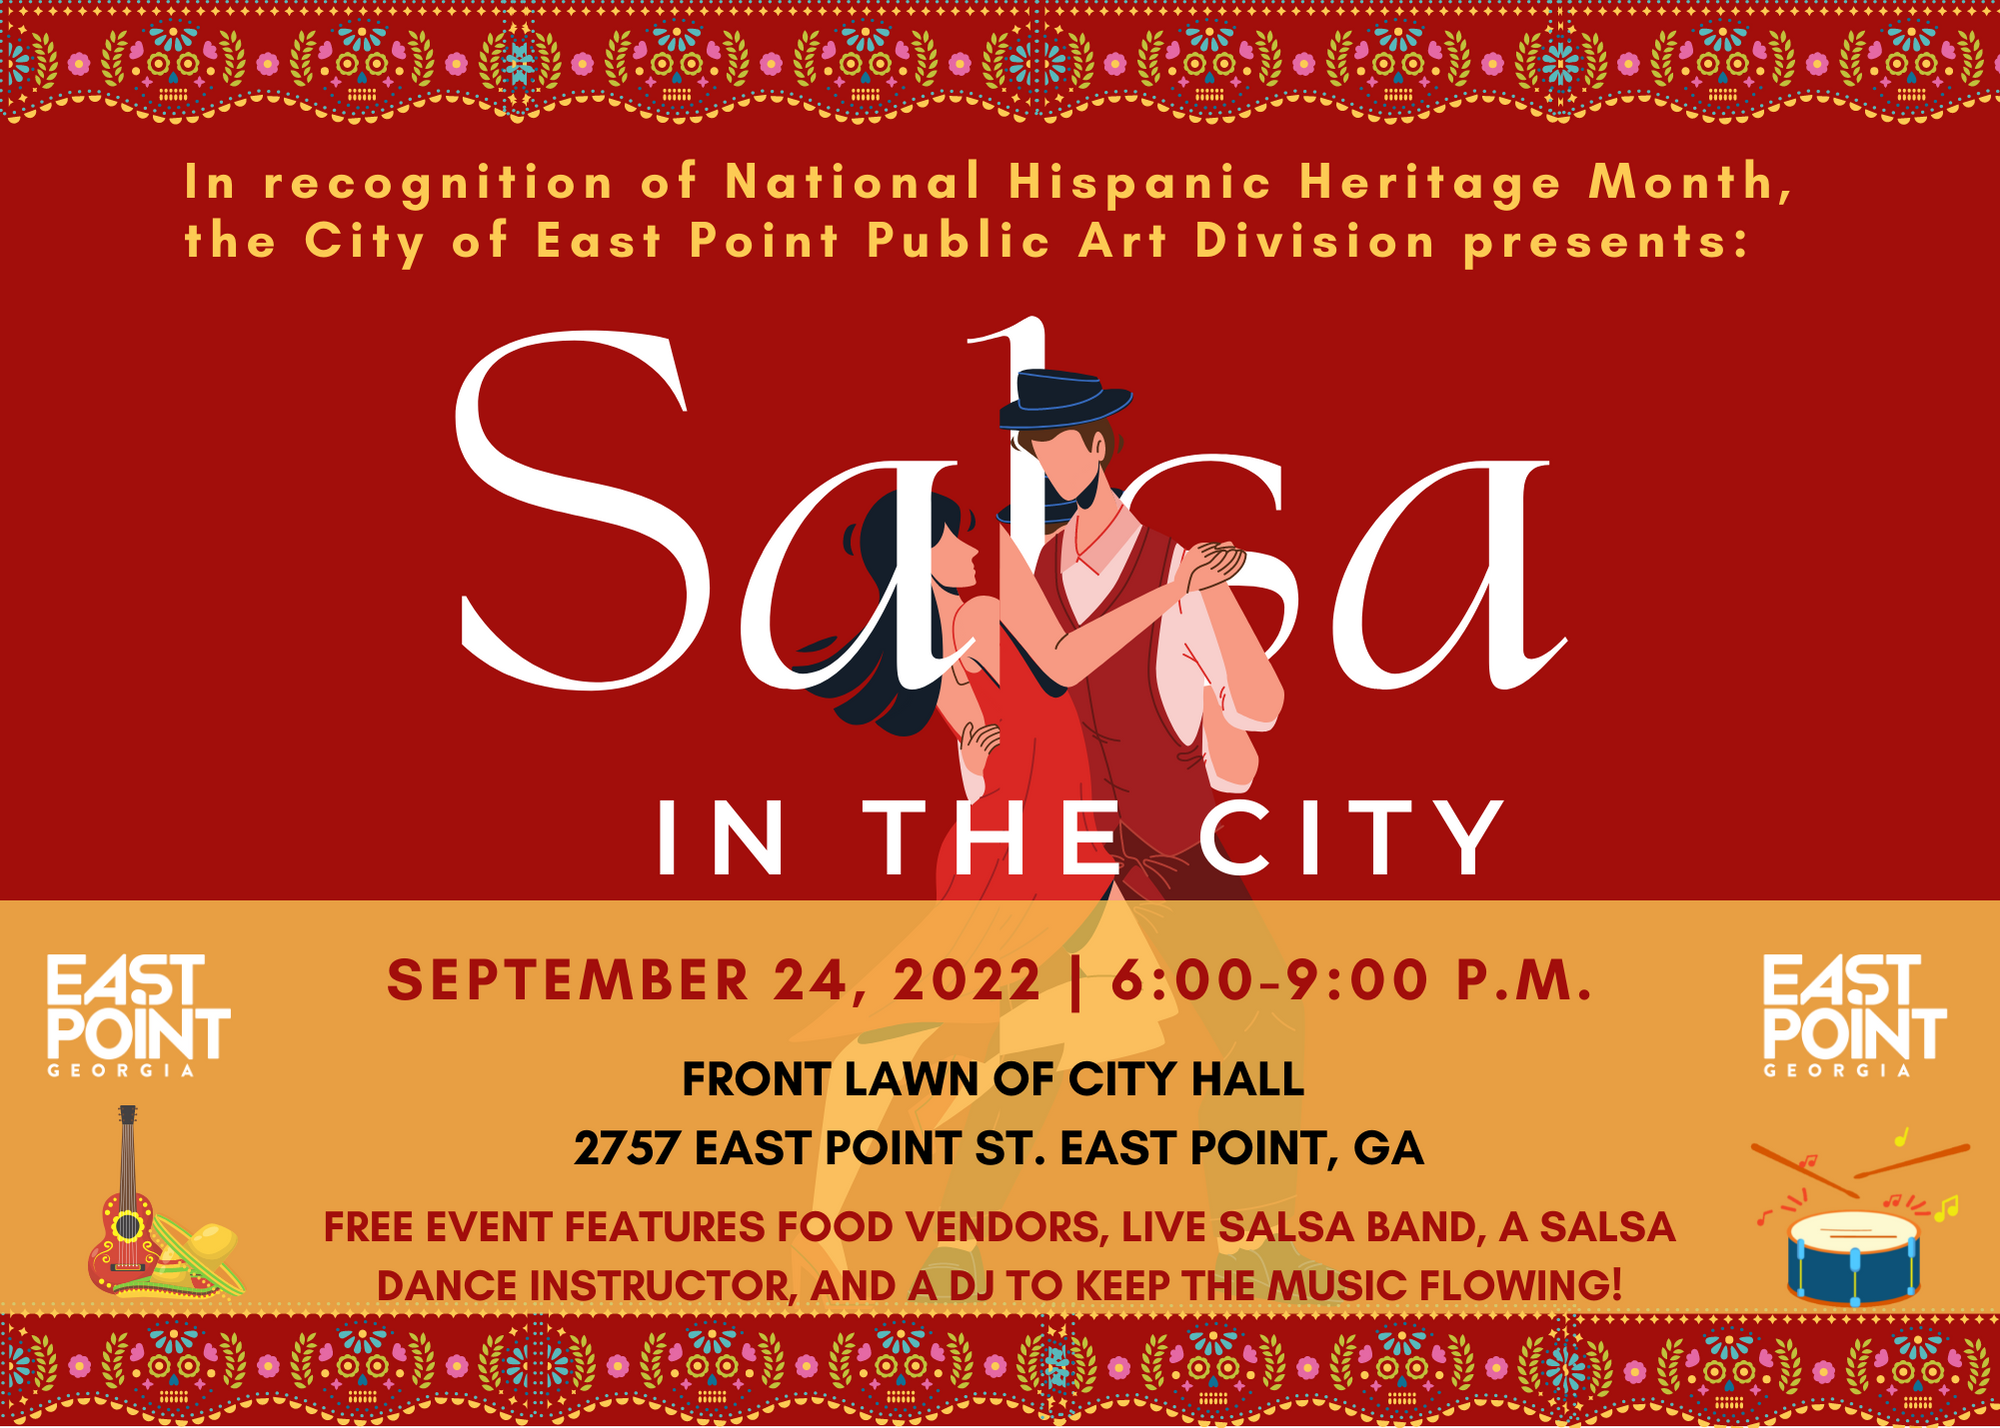 salsa in the city